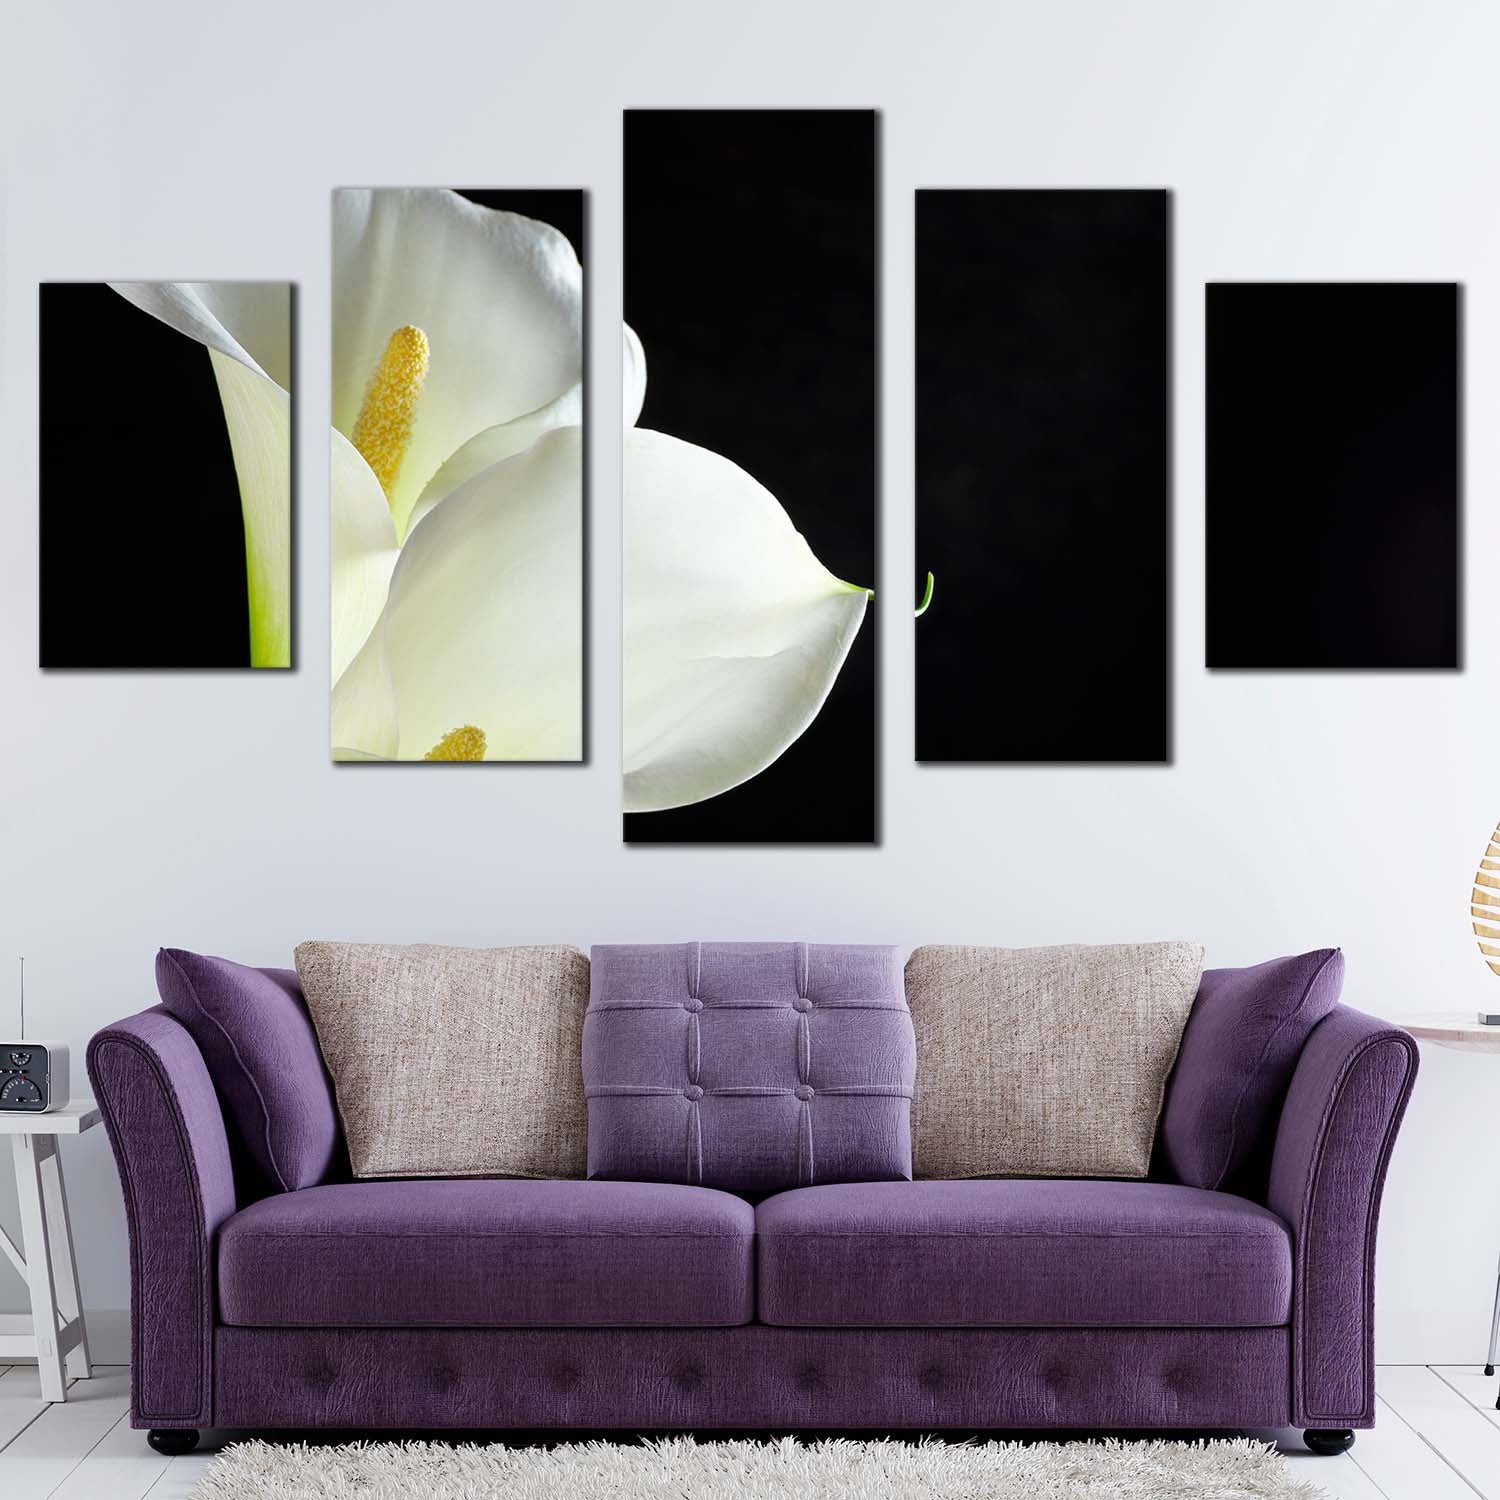 Lily Floral Canvas Wall Art, Black Background Isolated Flower 5 Piece